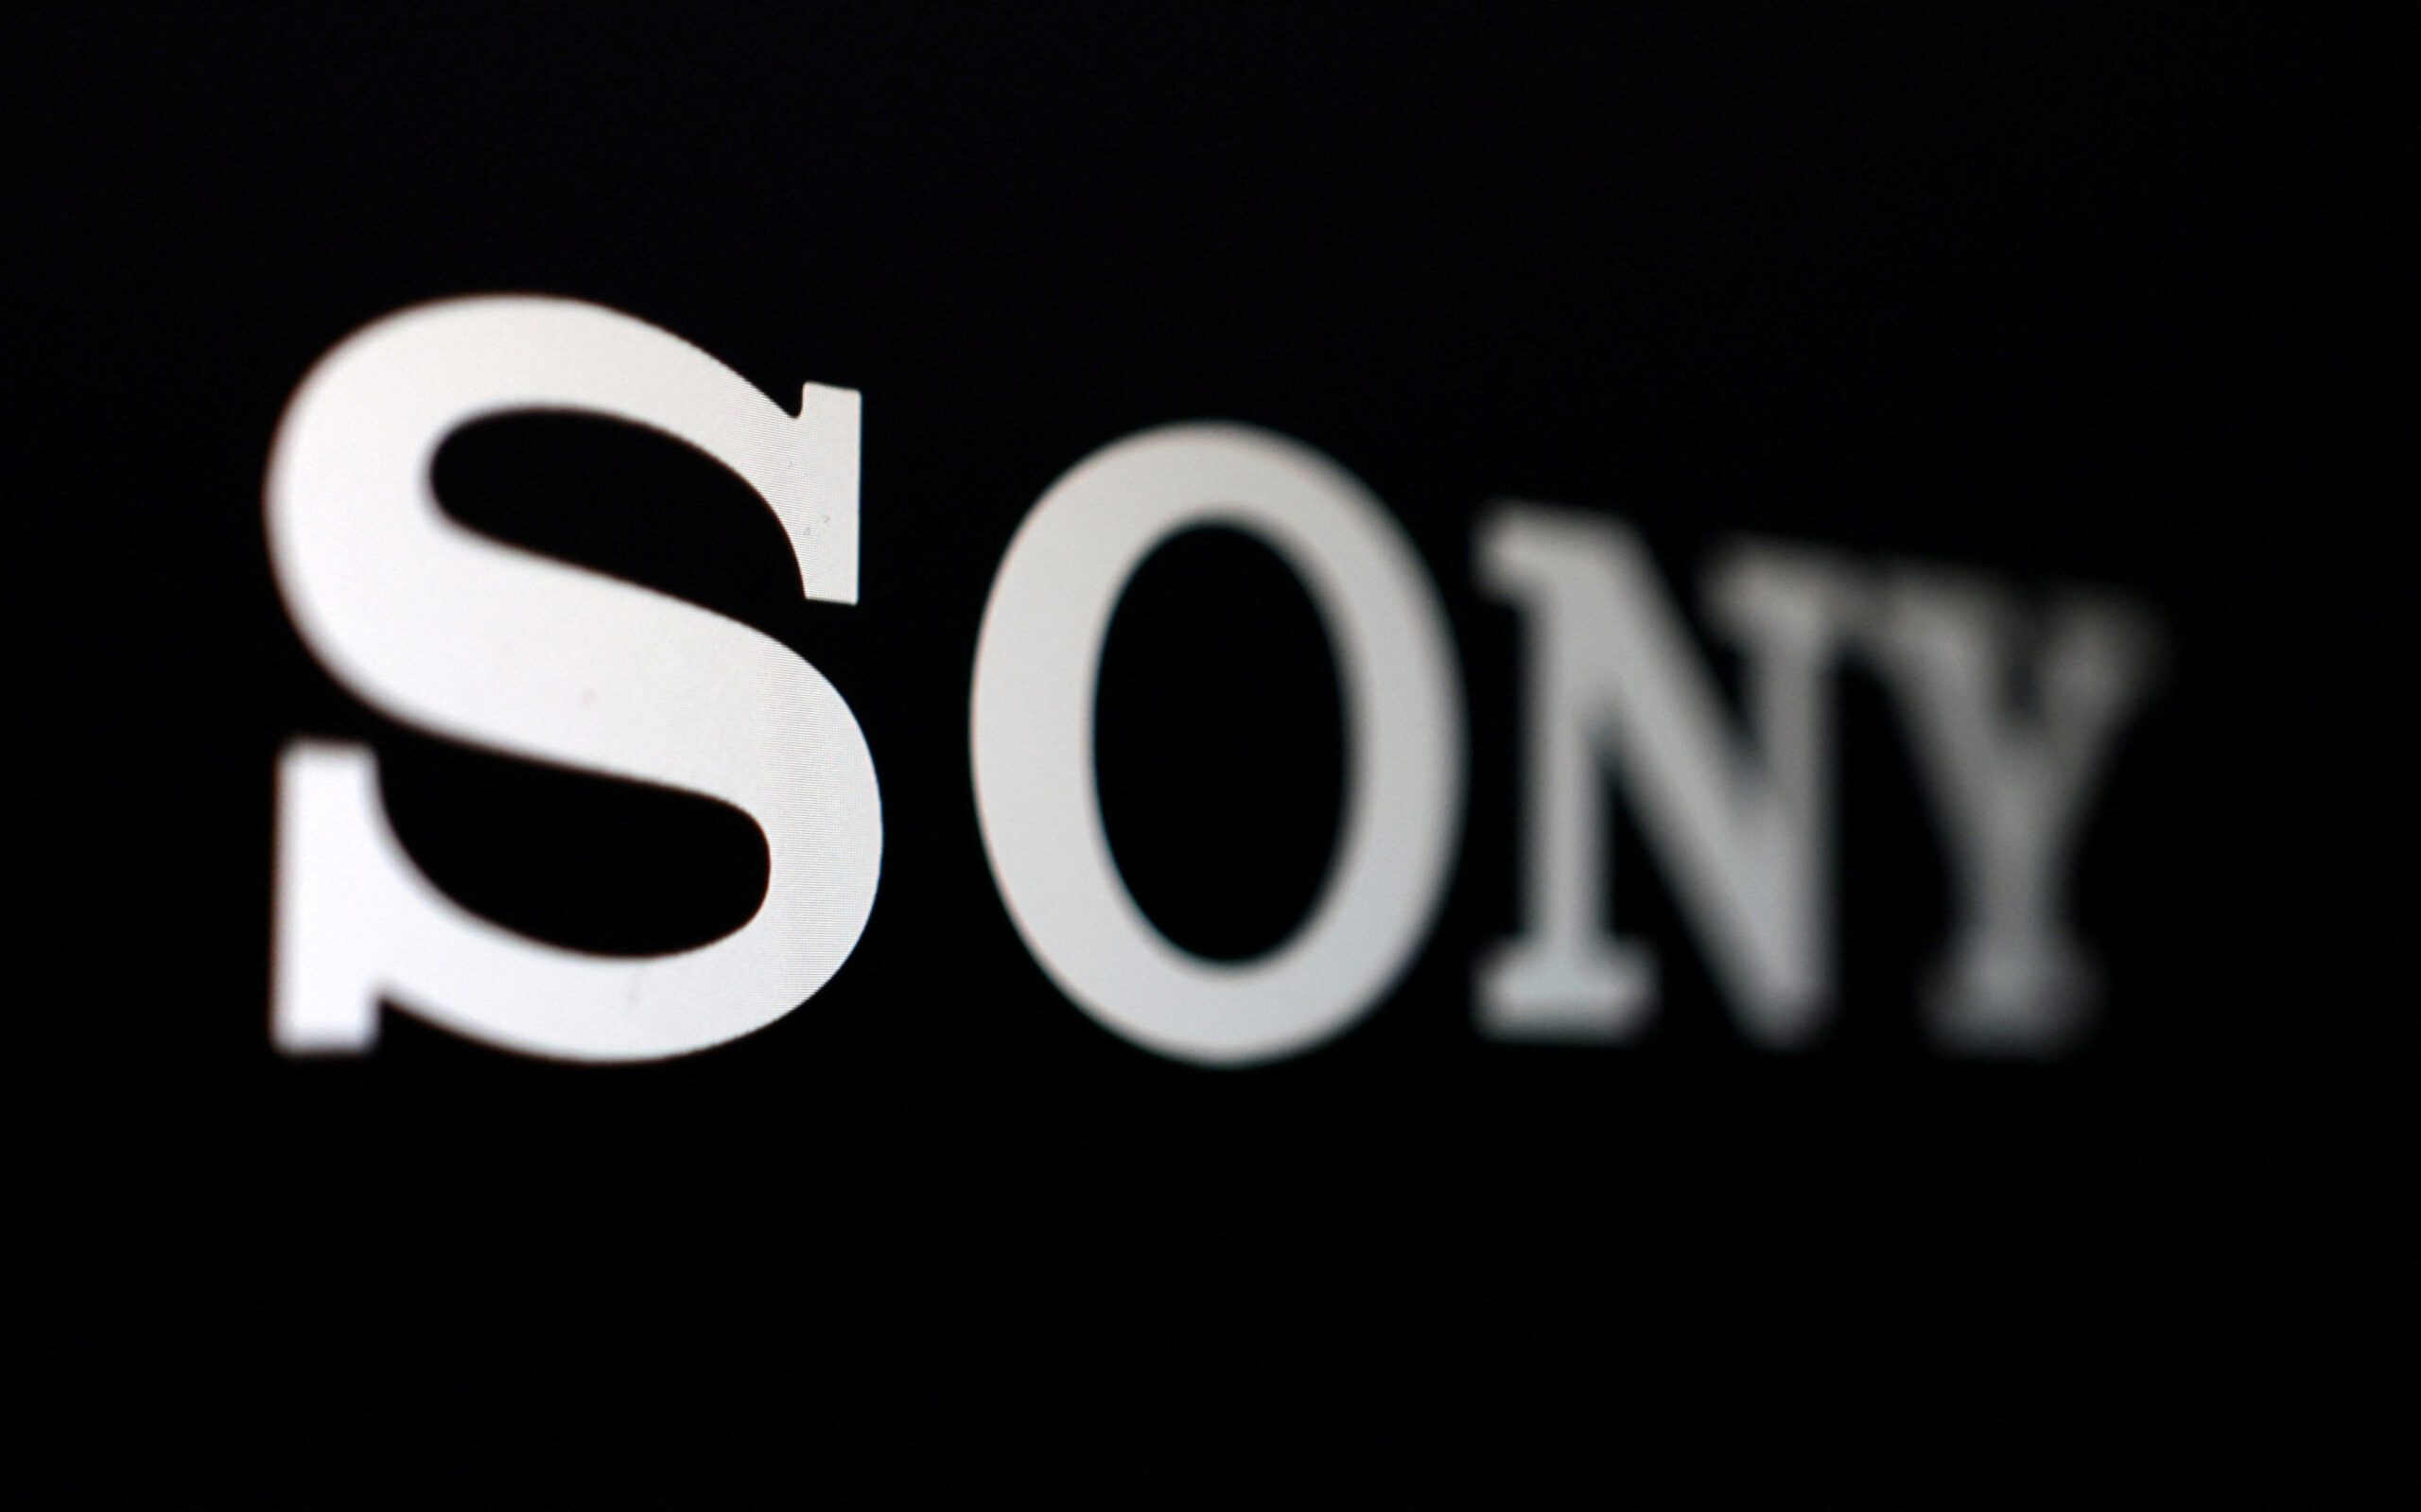 Sony plans to list its financial business division in 2025